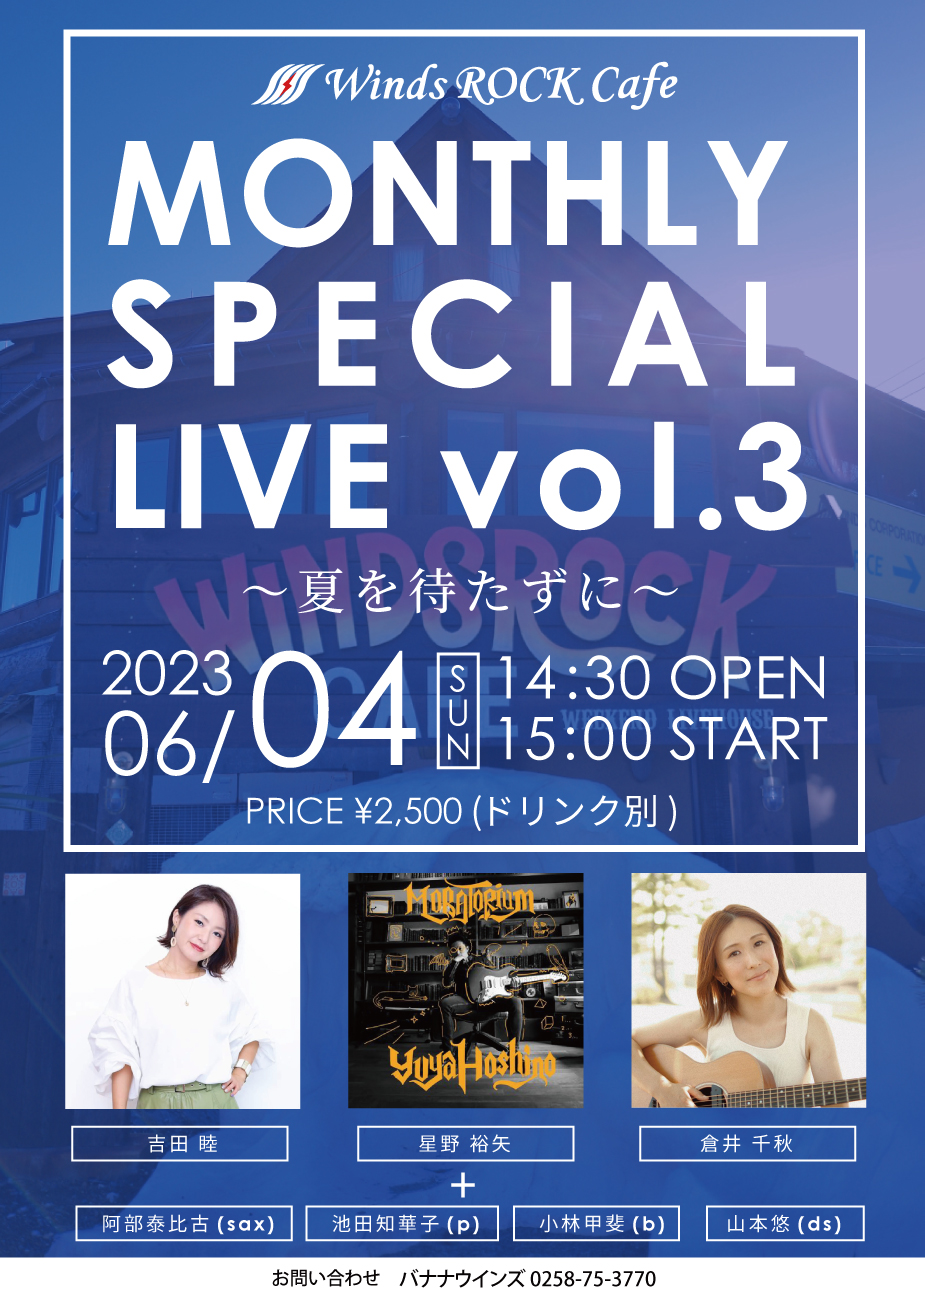 MONTHLY SPECIAL LIVE vol.3 ～夏を待たずに～